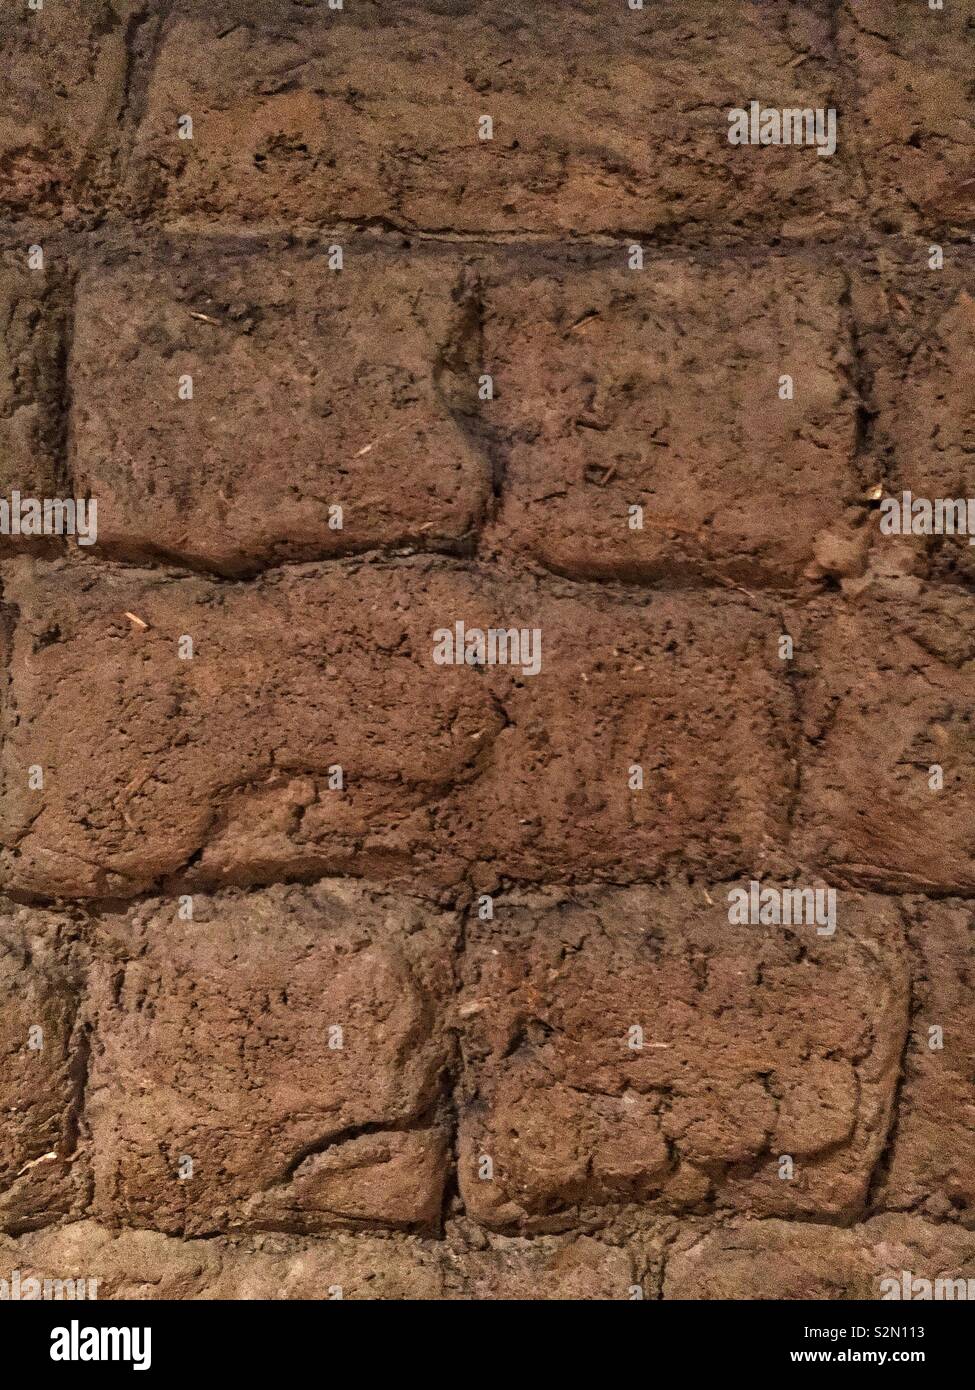 Clay mud bricks packed, dried, and strong as a wall building material. Stock Photo